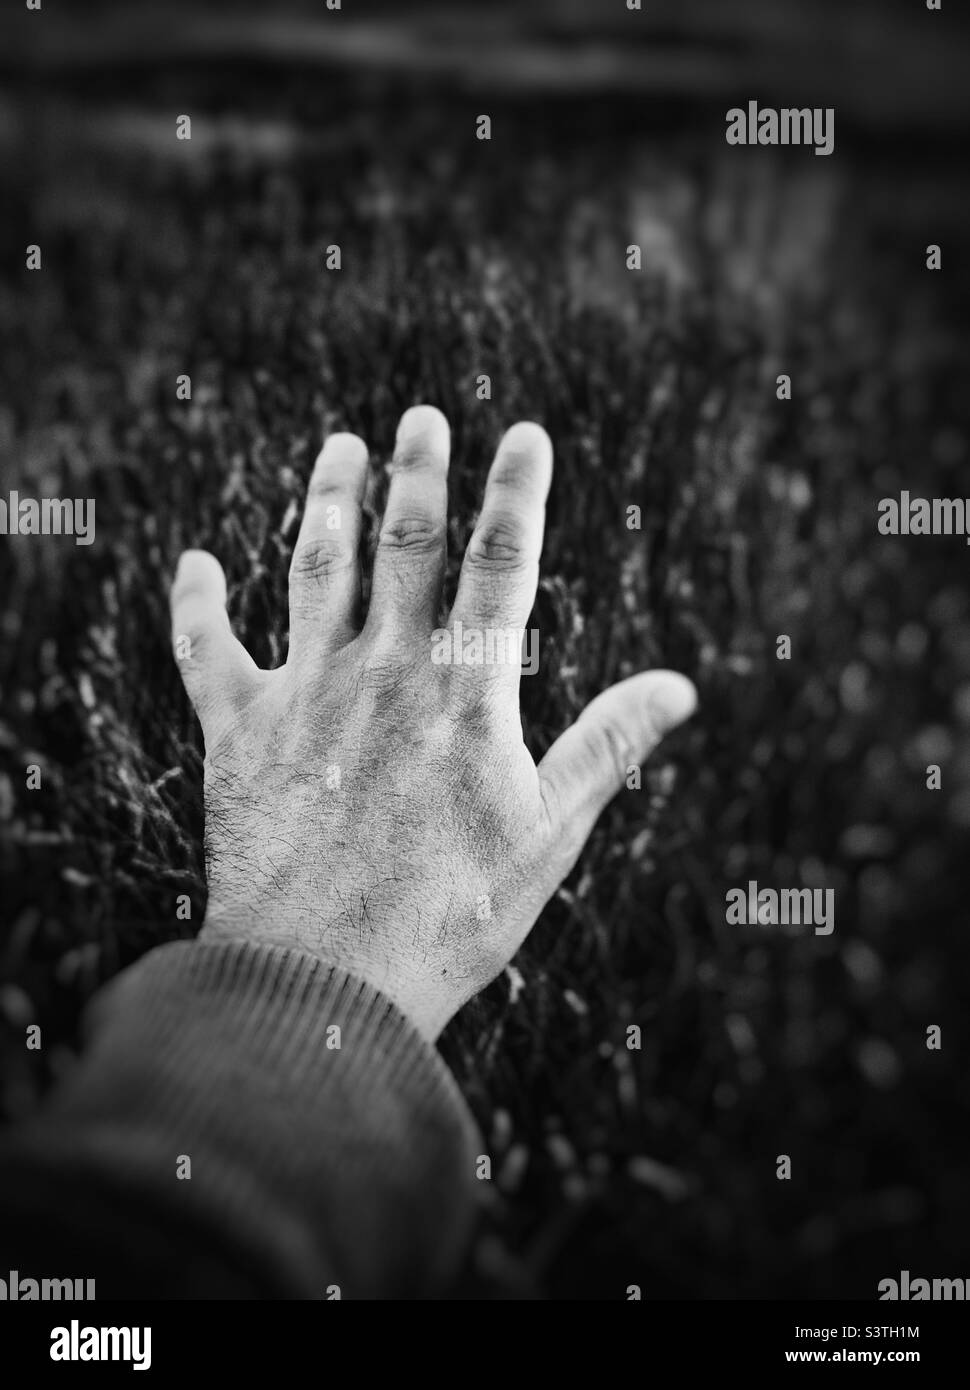 Black and white image of a hand in a field Stock Photo